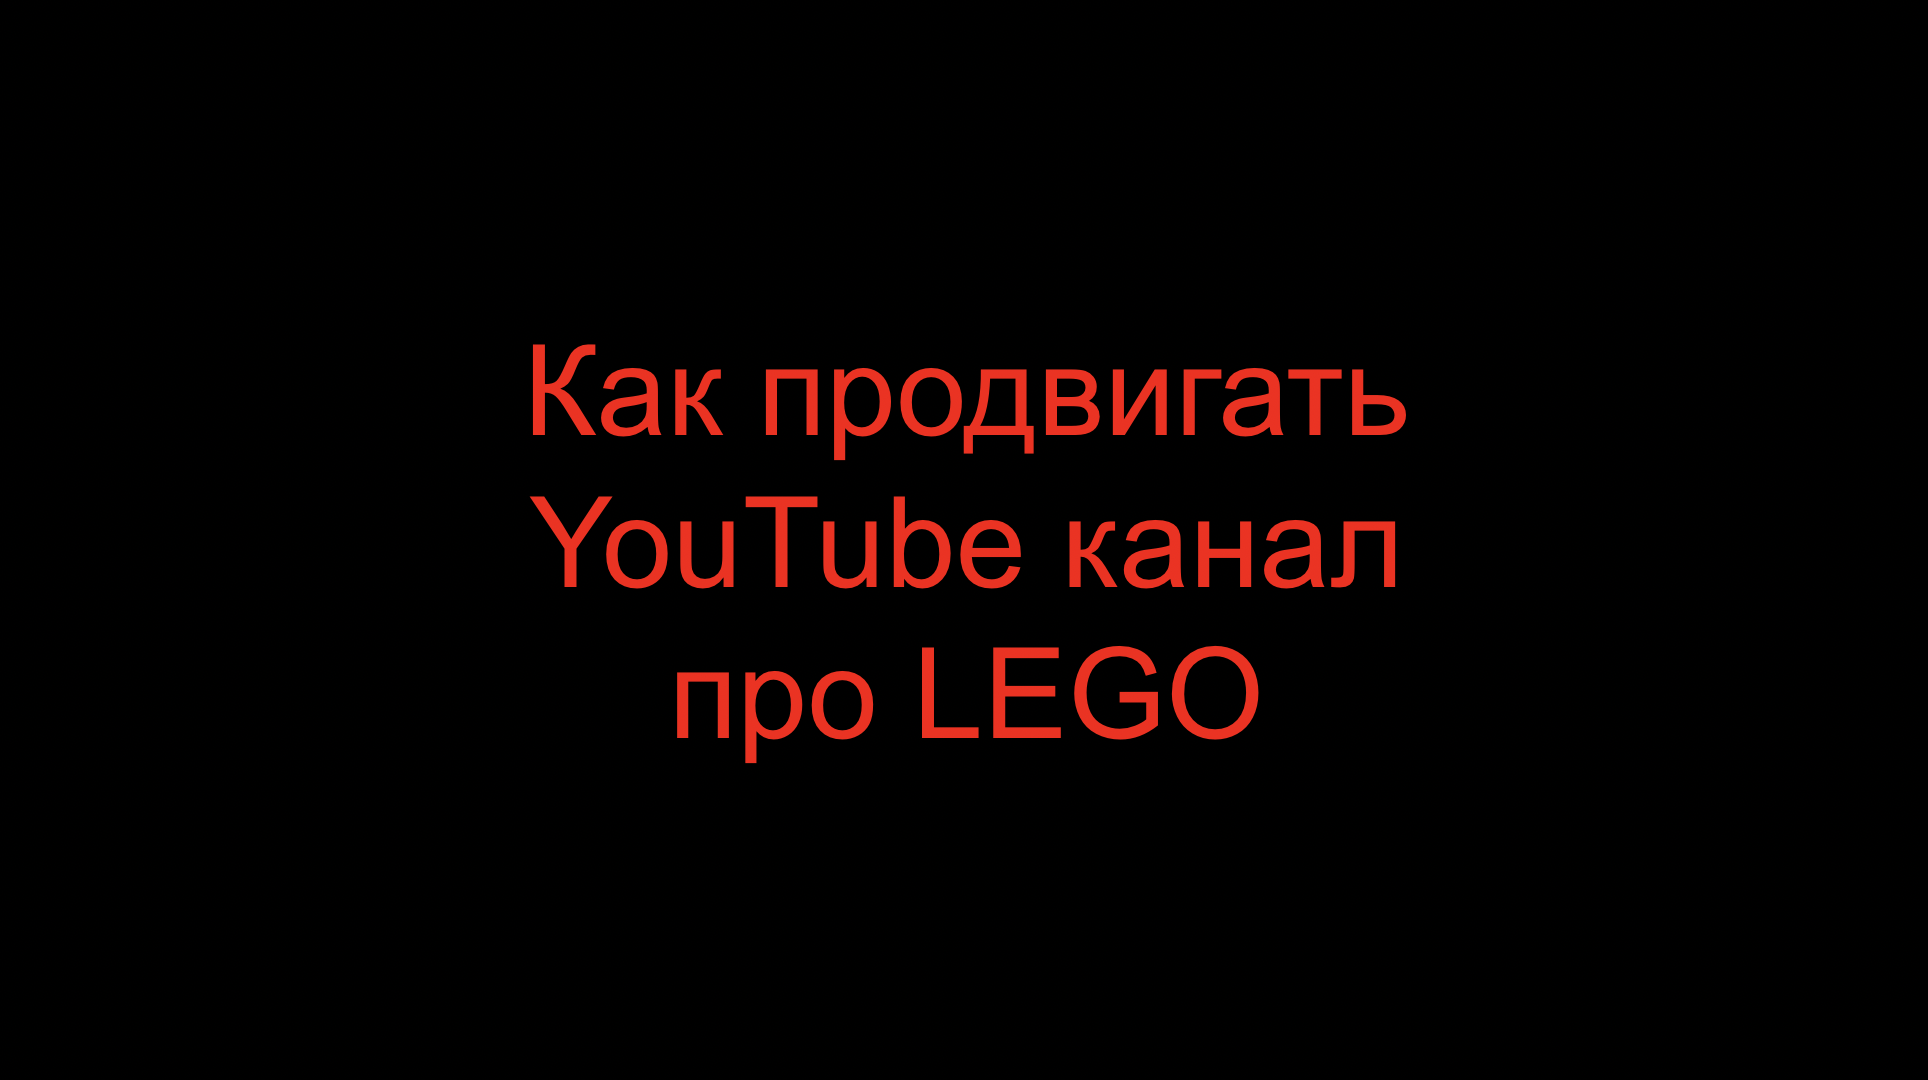 You are currently viewing Как продвигать YouTube канал про LEGO?